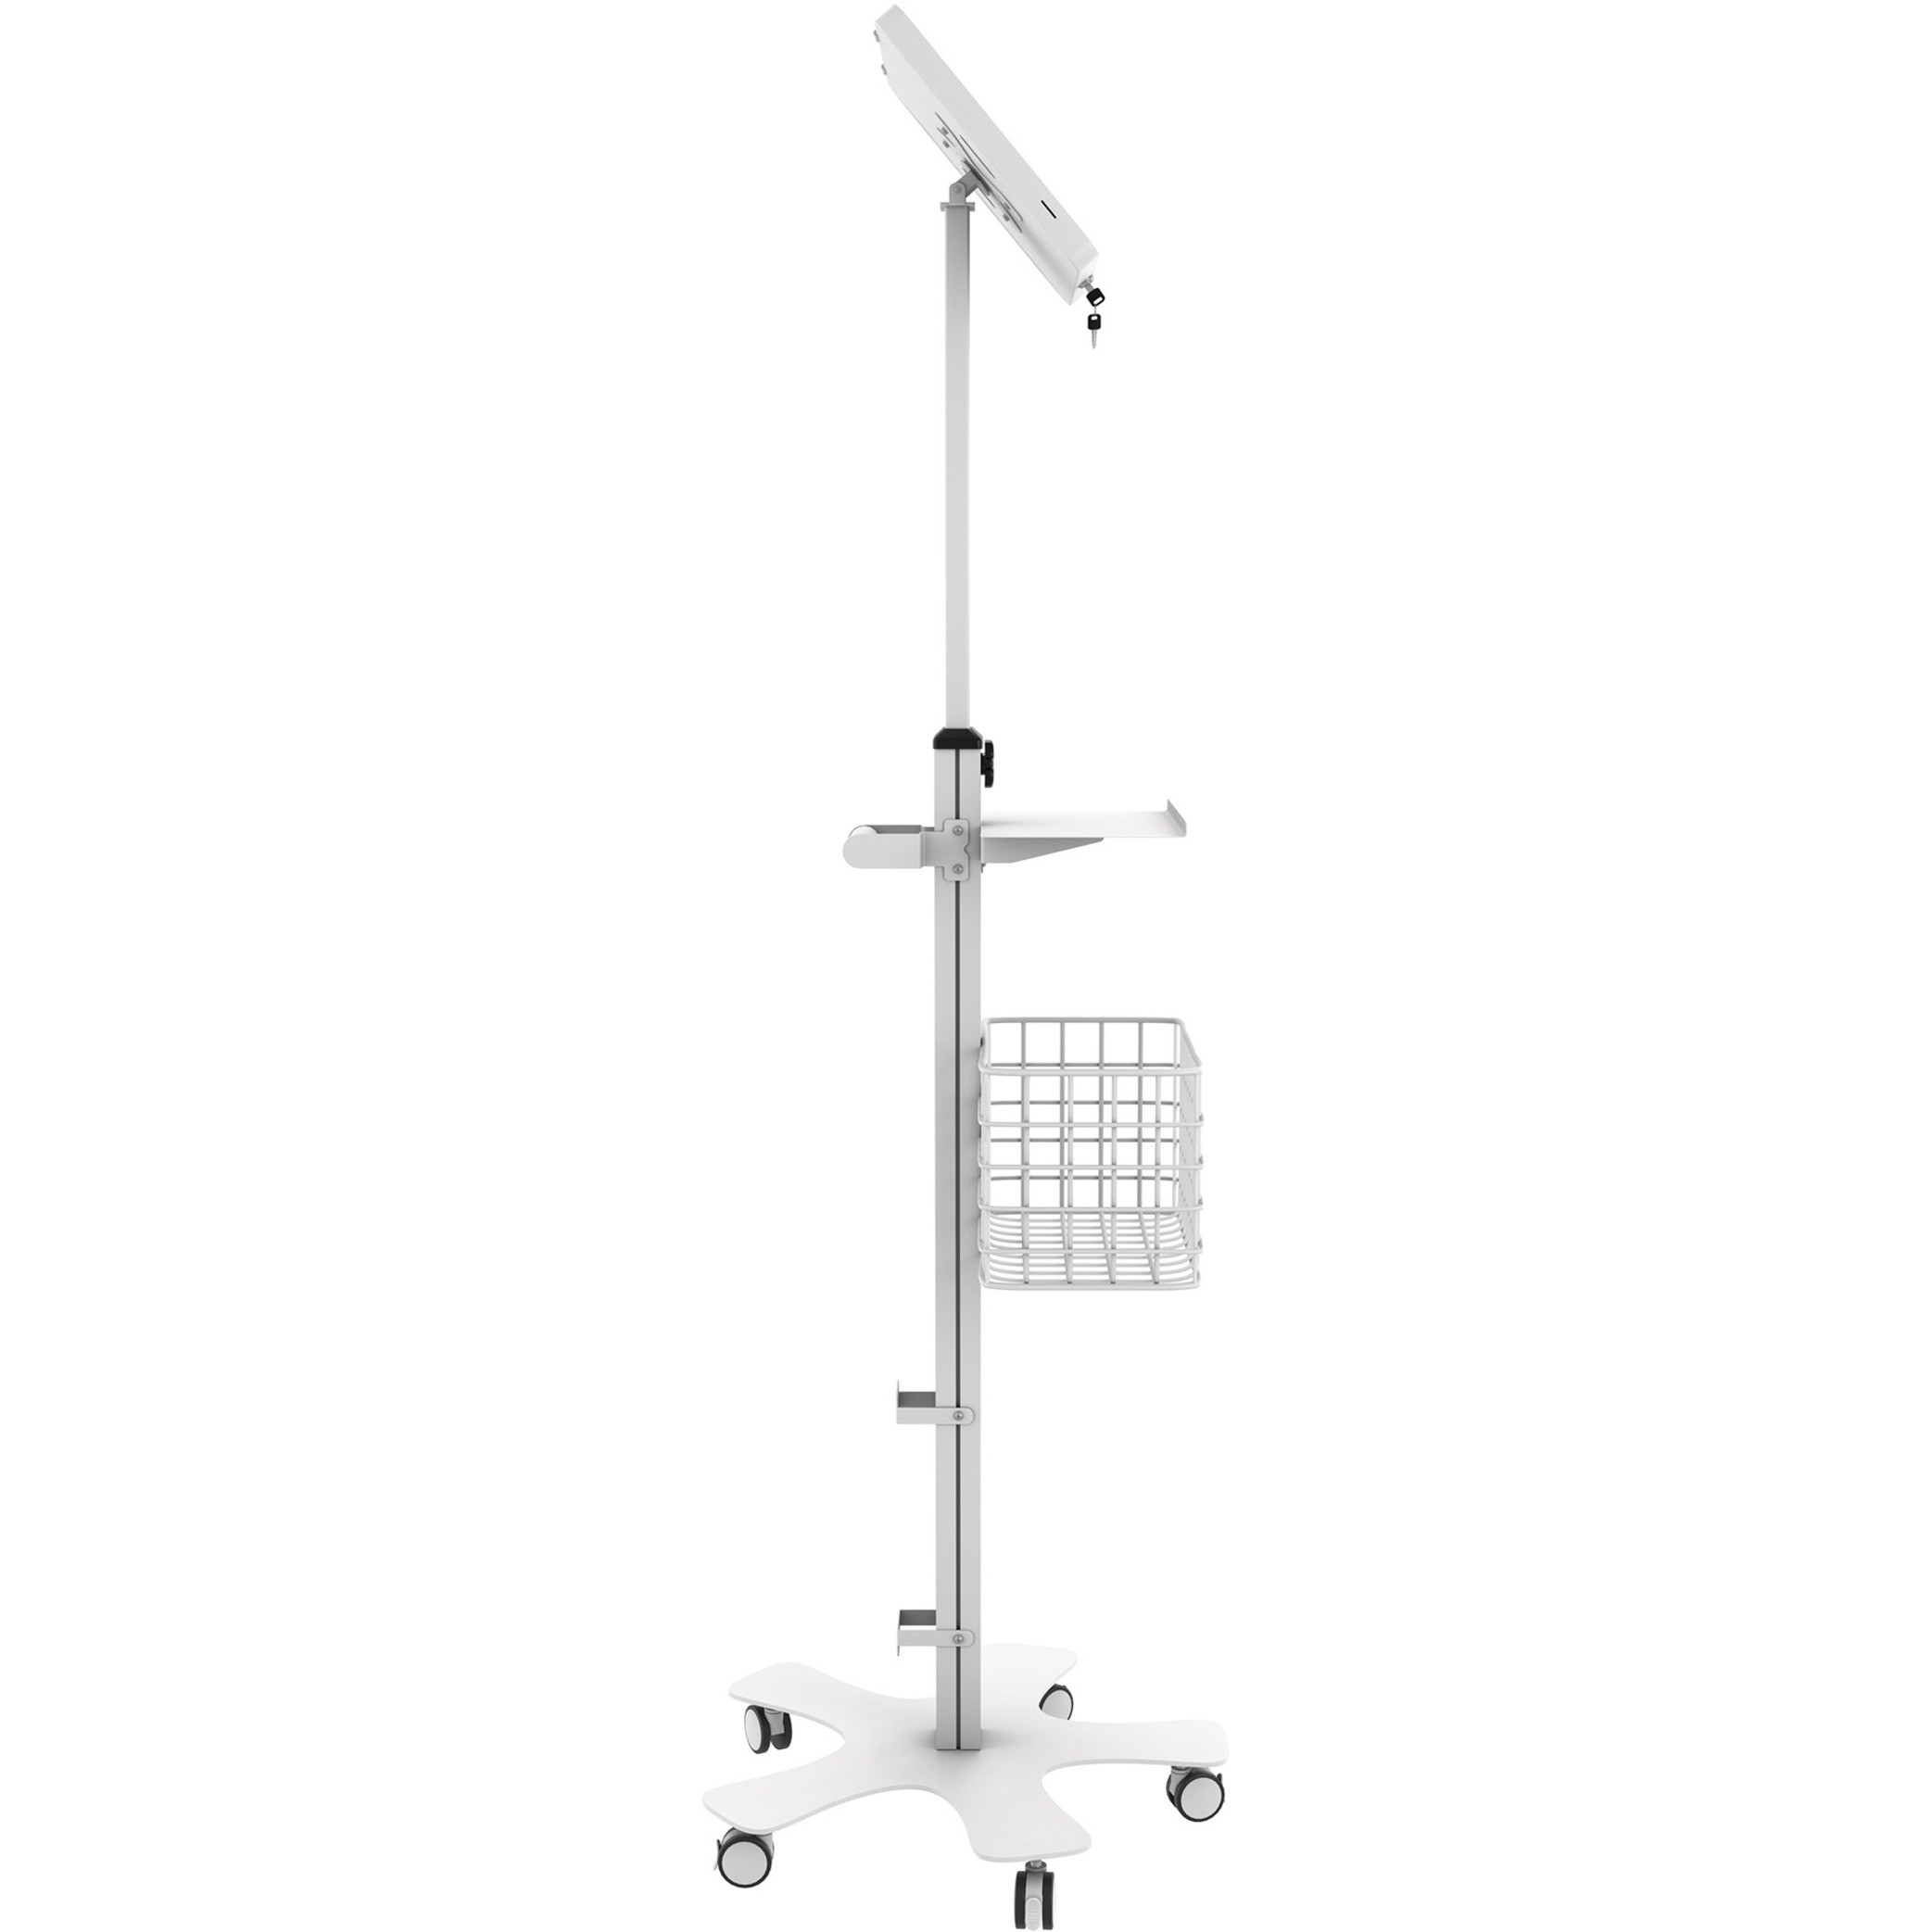 Cta Digital Accessories Medical Mobile Floor Stand with Large Paragon EnclosureUp to 12.9″ Screen Support61″ Height x 14.5″ Width x 13″ DepthFloo… PAD-MFSPL